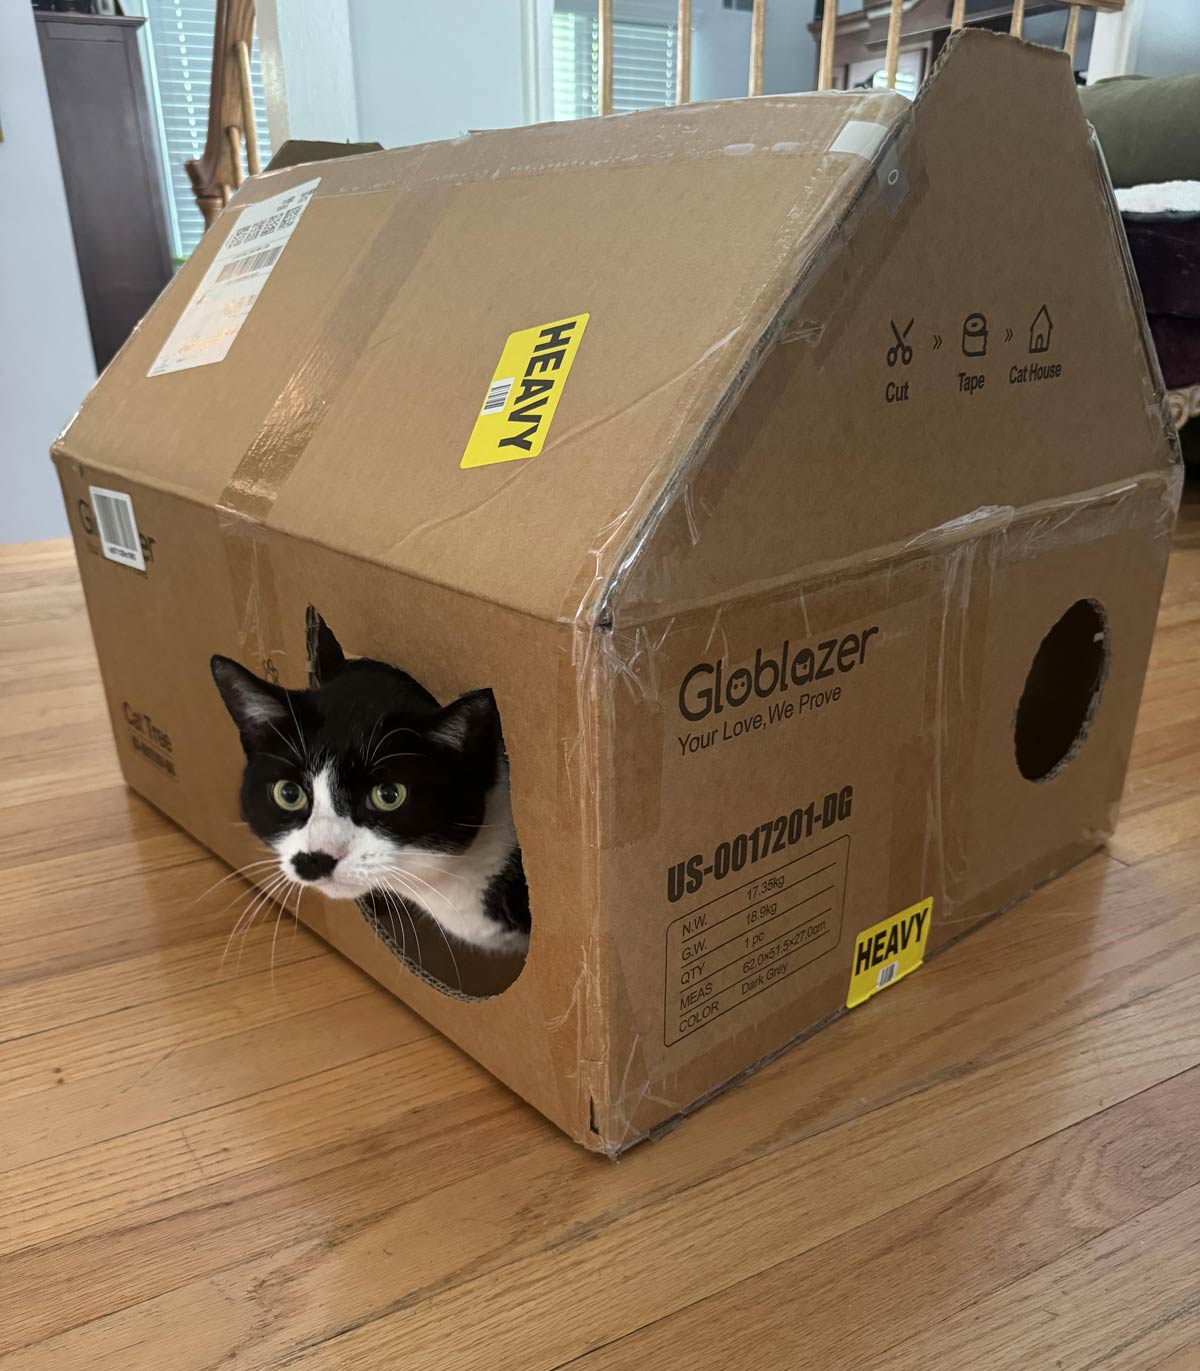 The box my cats new cat tree came in had instructions to turn it into a little house, and my cat prefers the box to the tree